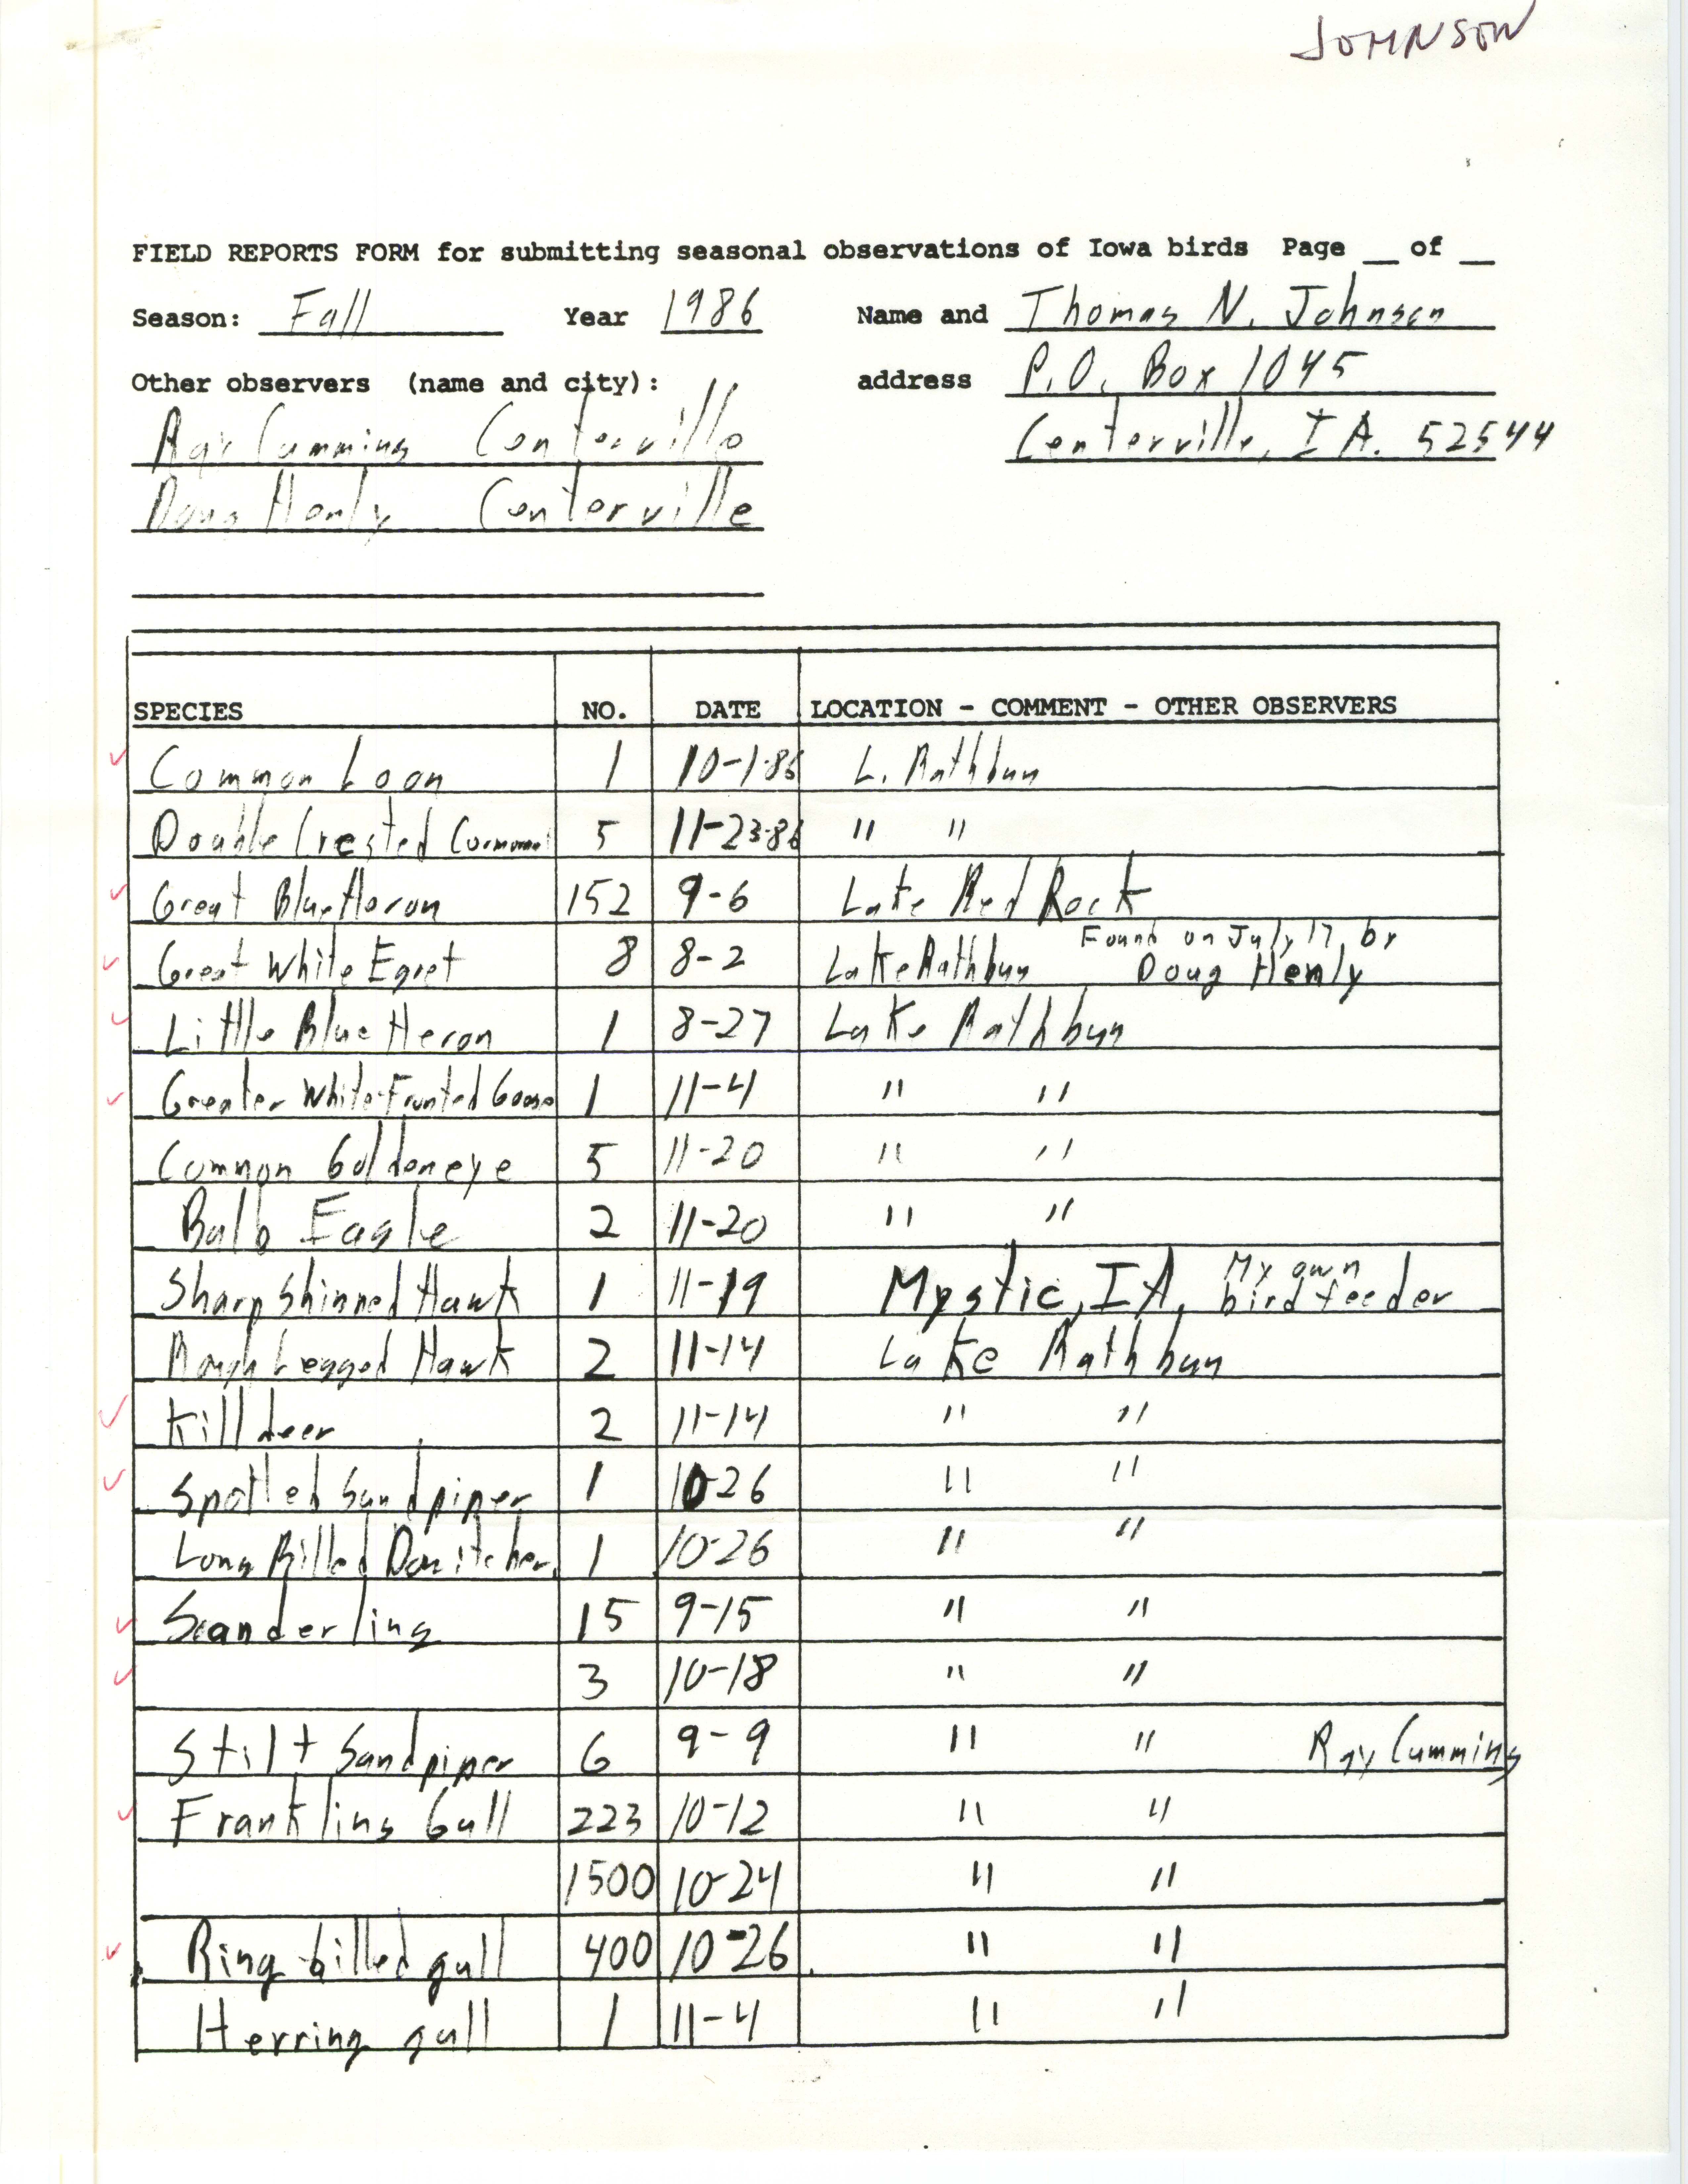 Field reports form for submitting seasonal observations of Iowa birds, Tom Johnson, fall 1986